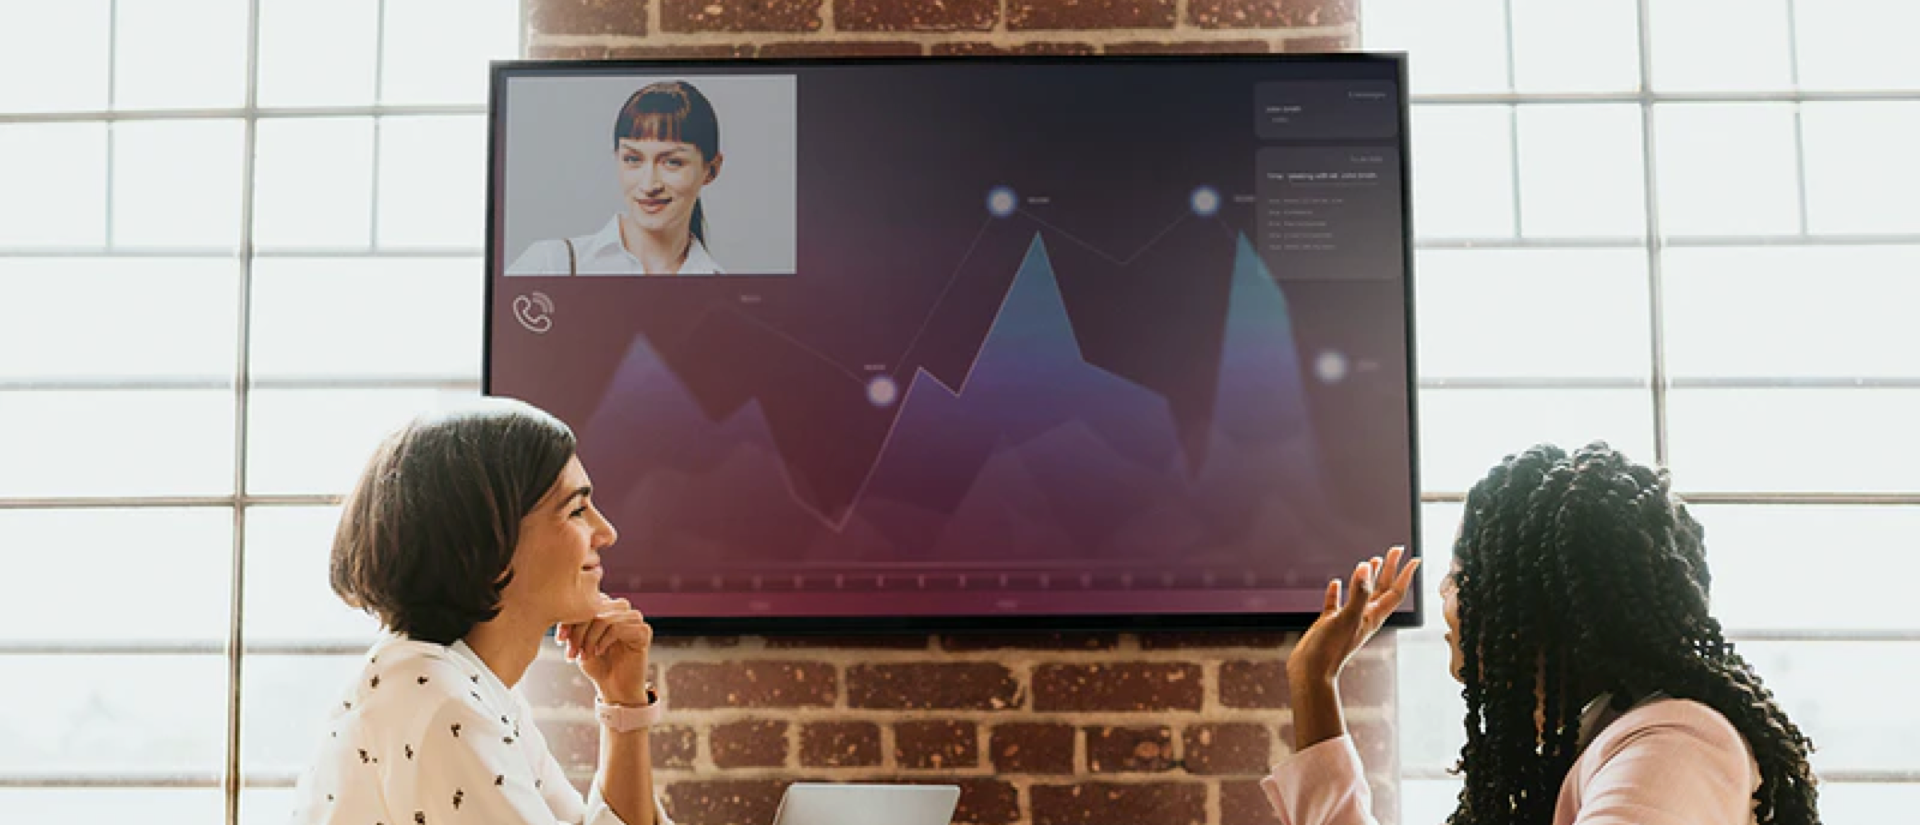 Employees Communicating internally with the help of digital signage